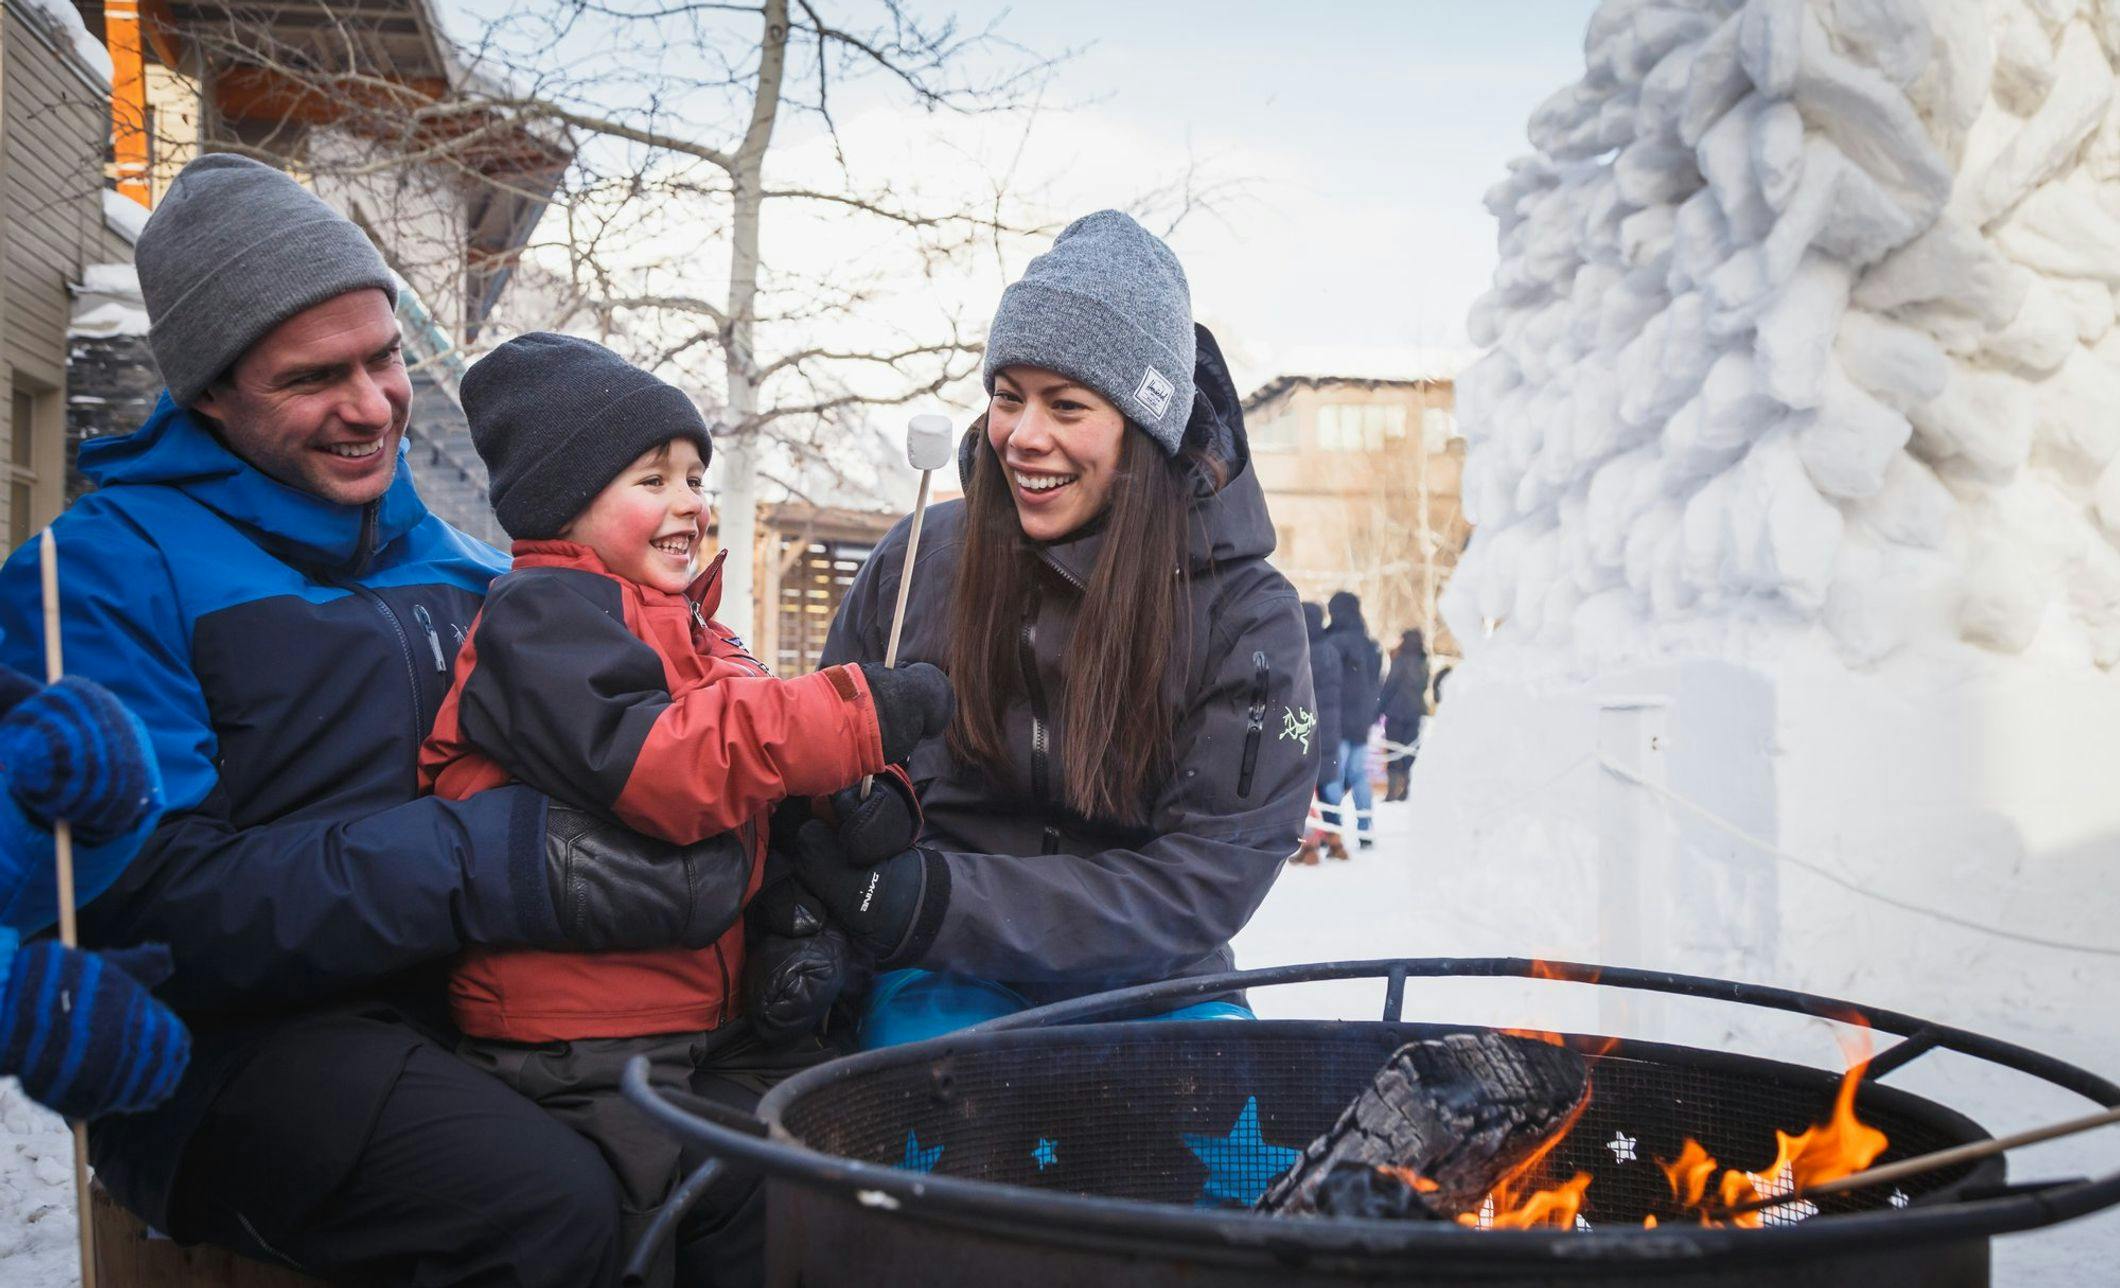 A family wearing lots of cozy winter layers roasting a marshmallow at an outdoor fire pit on a snowy street